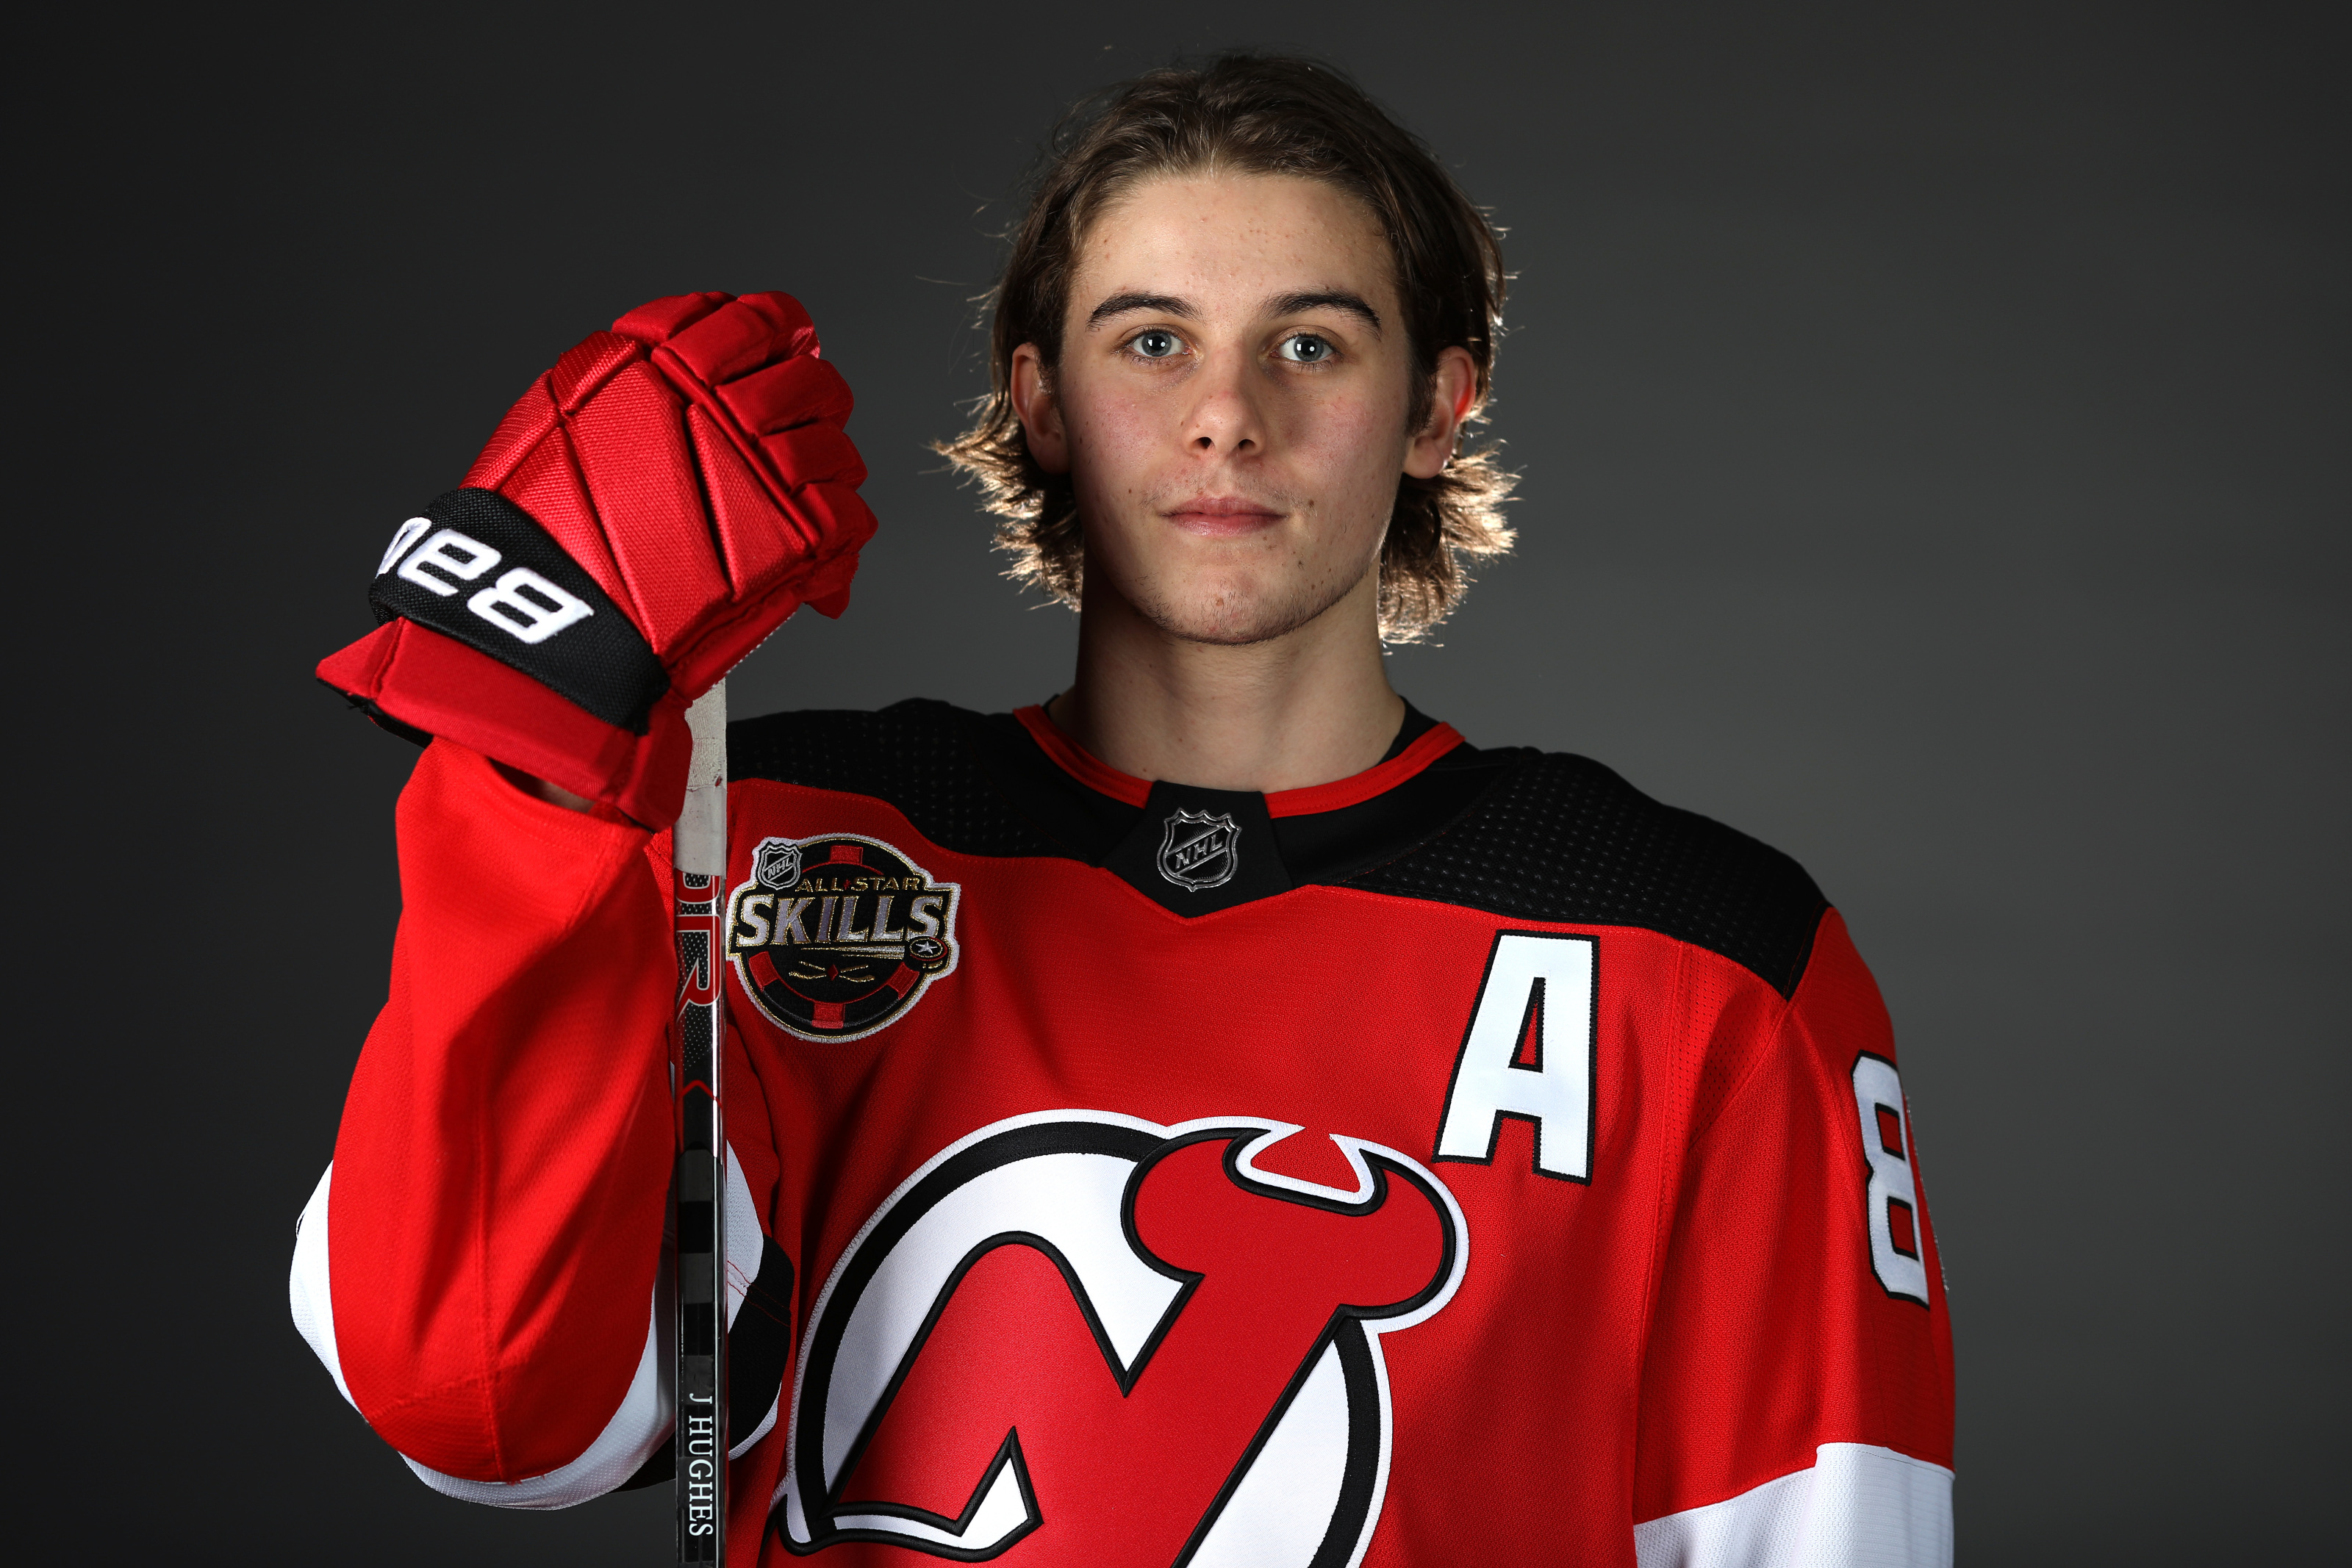 Jack Hughes New Jersey Devils Jersey red